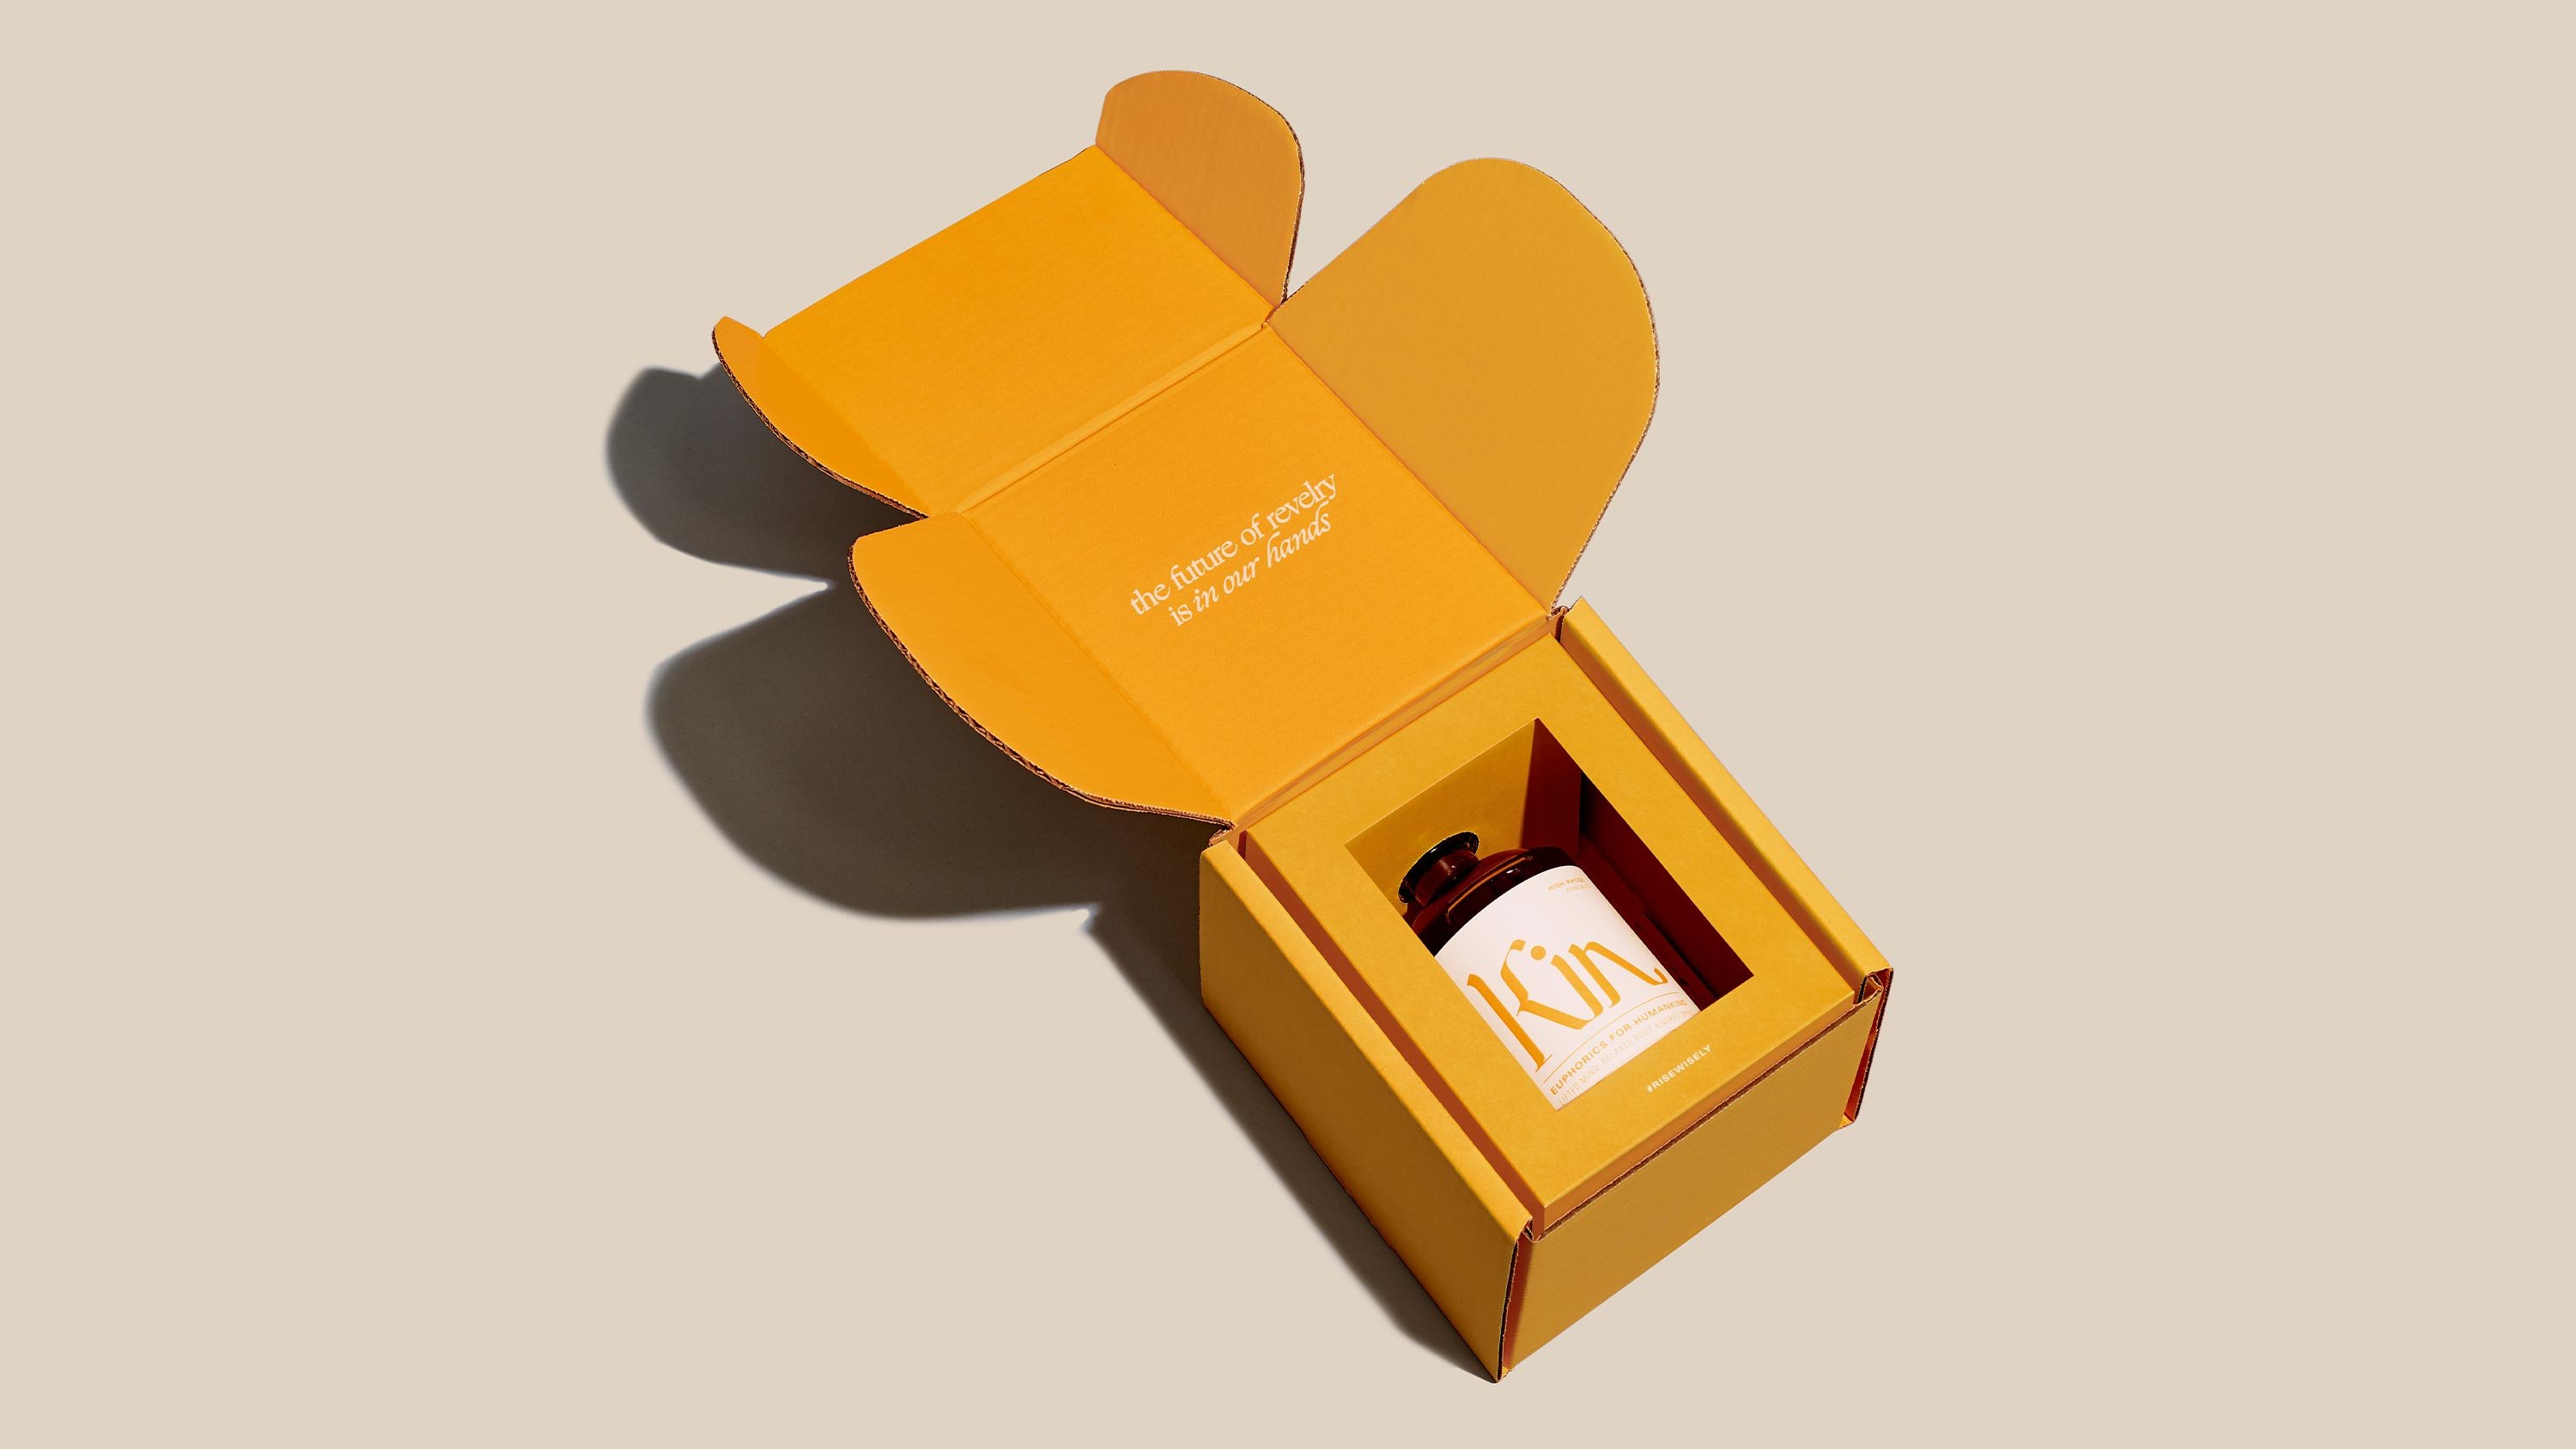 Kin Euphorics Packaging Design by RoAndCo, yellow box with bottle inside